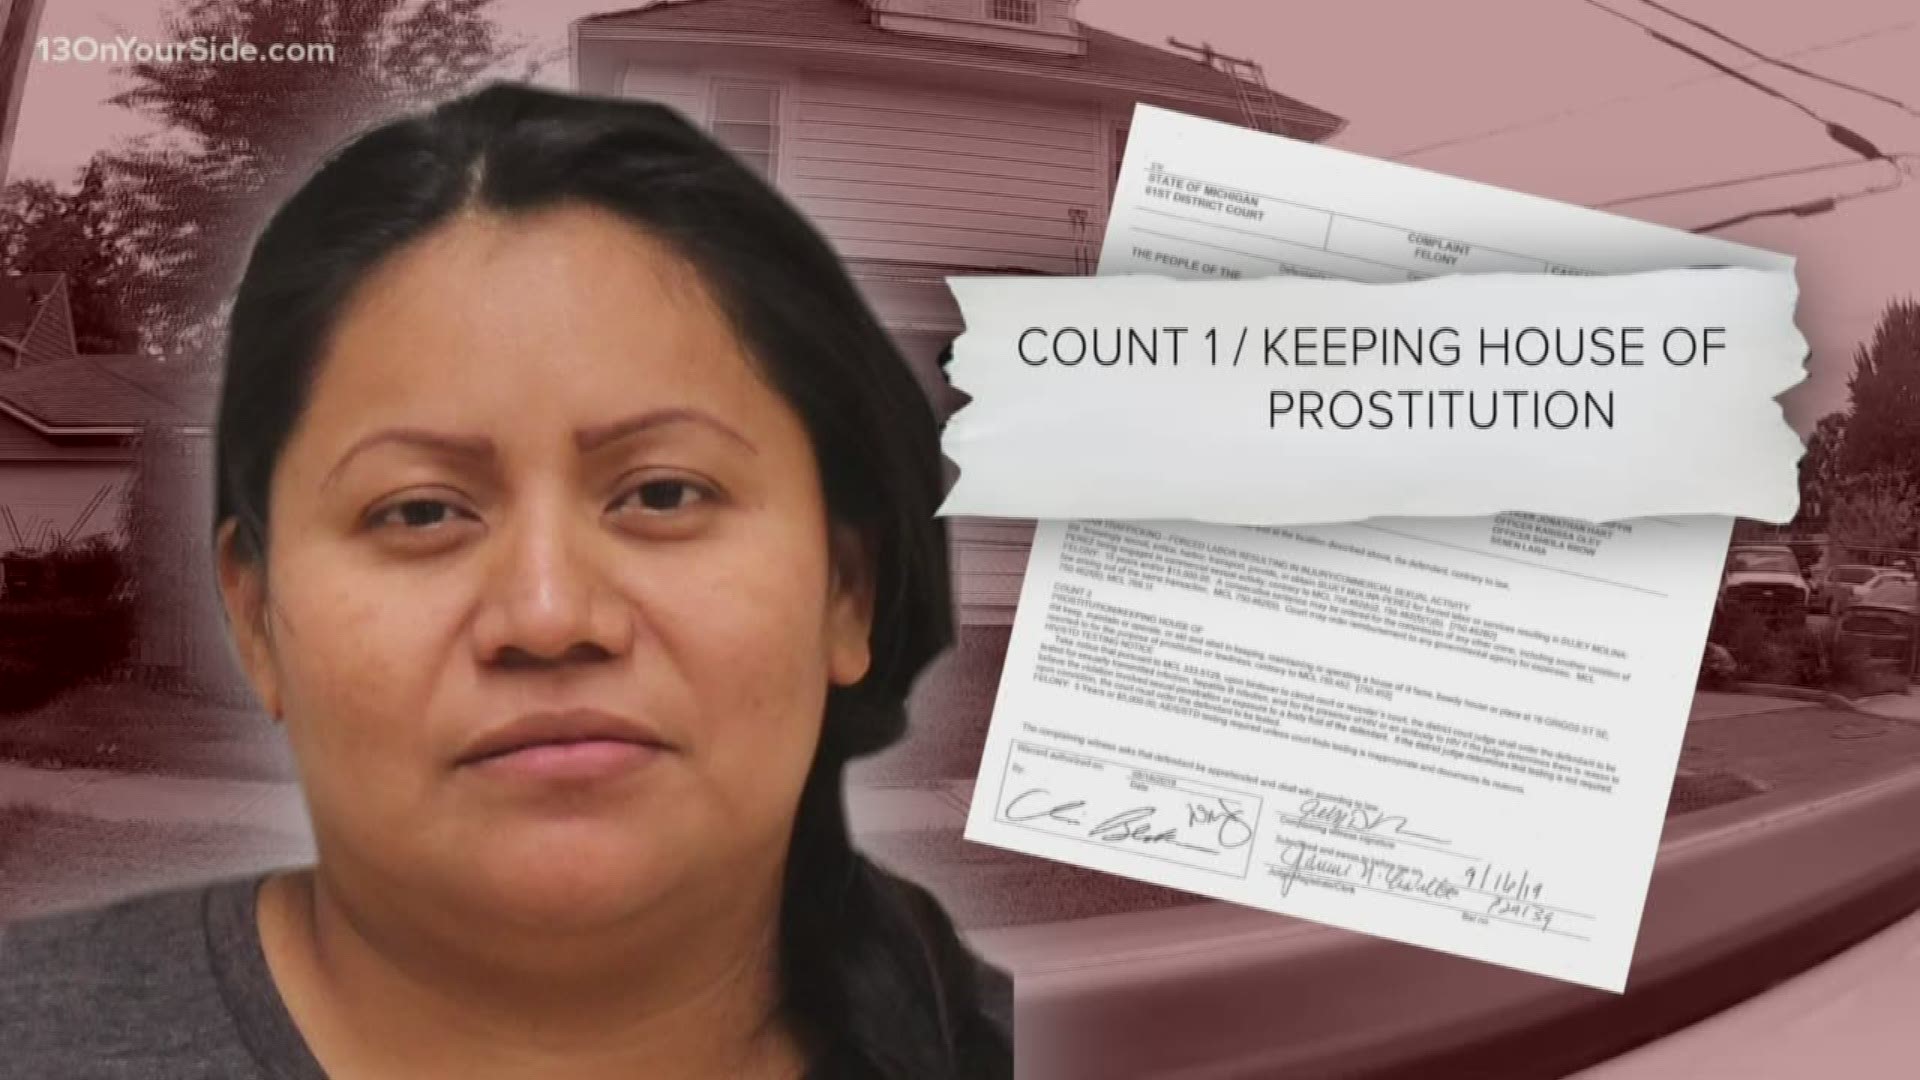 A woman brought from Houston to Grand Rapids under the belief she would be working as a housekeeper instead was forced into prostitution, court records show.